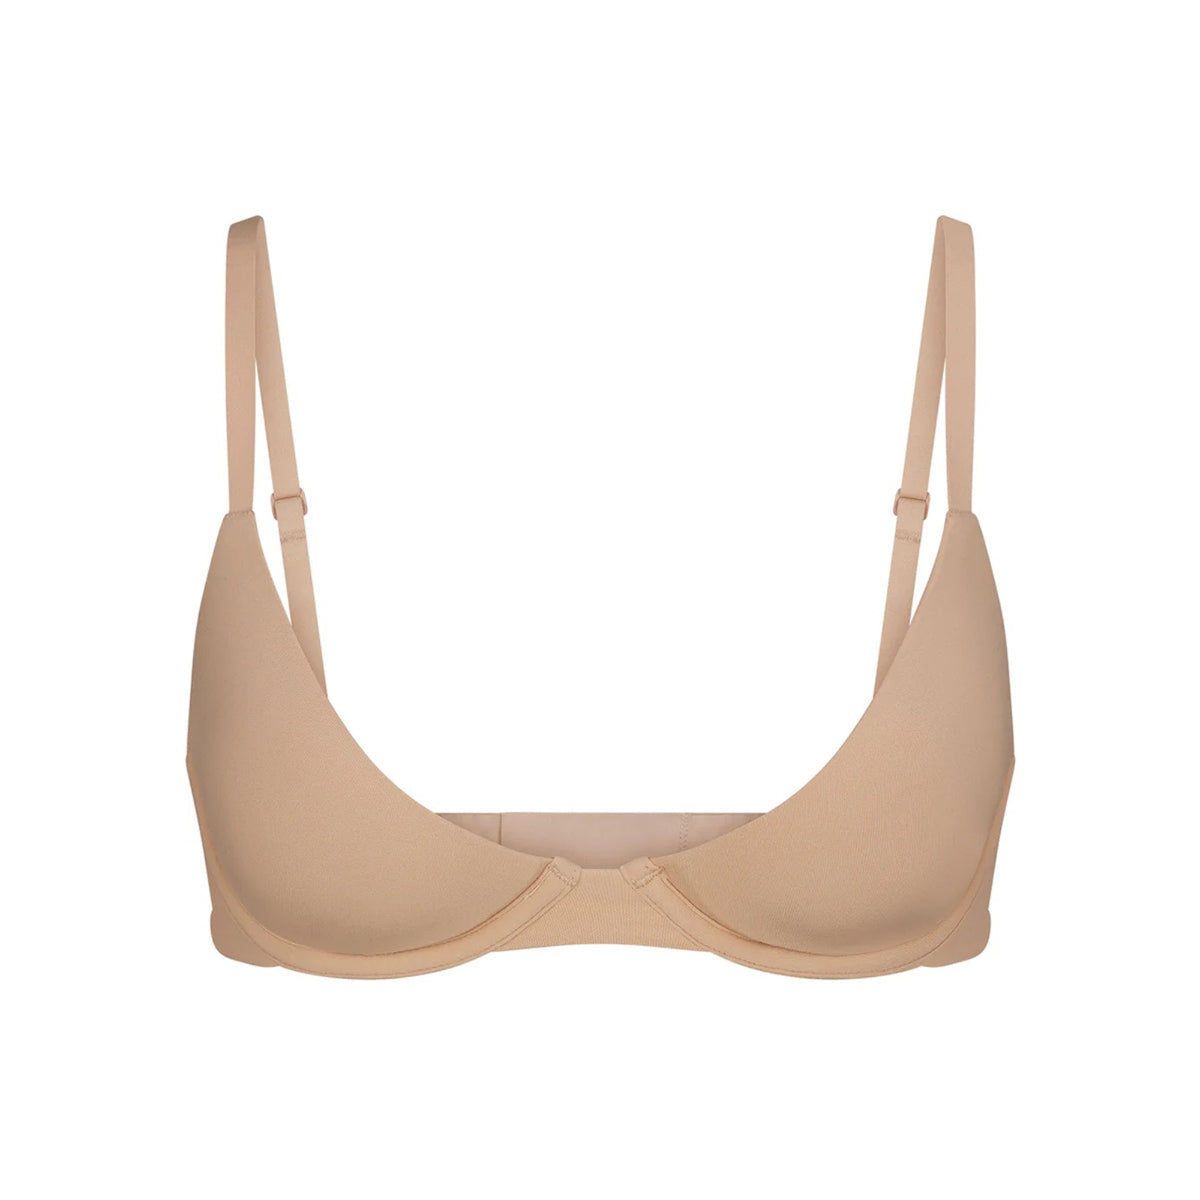 SKIMS launches 'Ultimate Bra' that gives a new take on the traditional push- up - Good Morning America